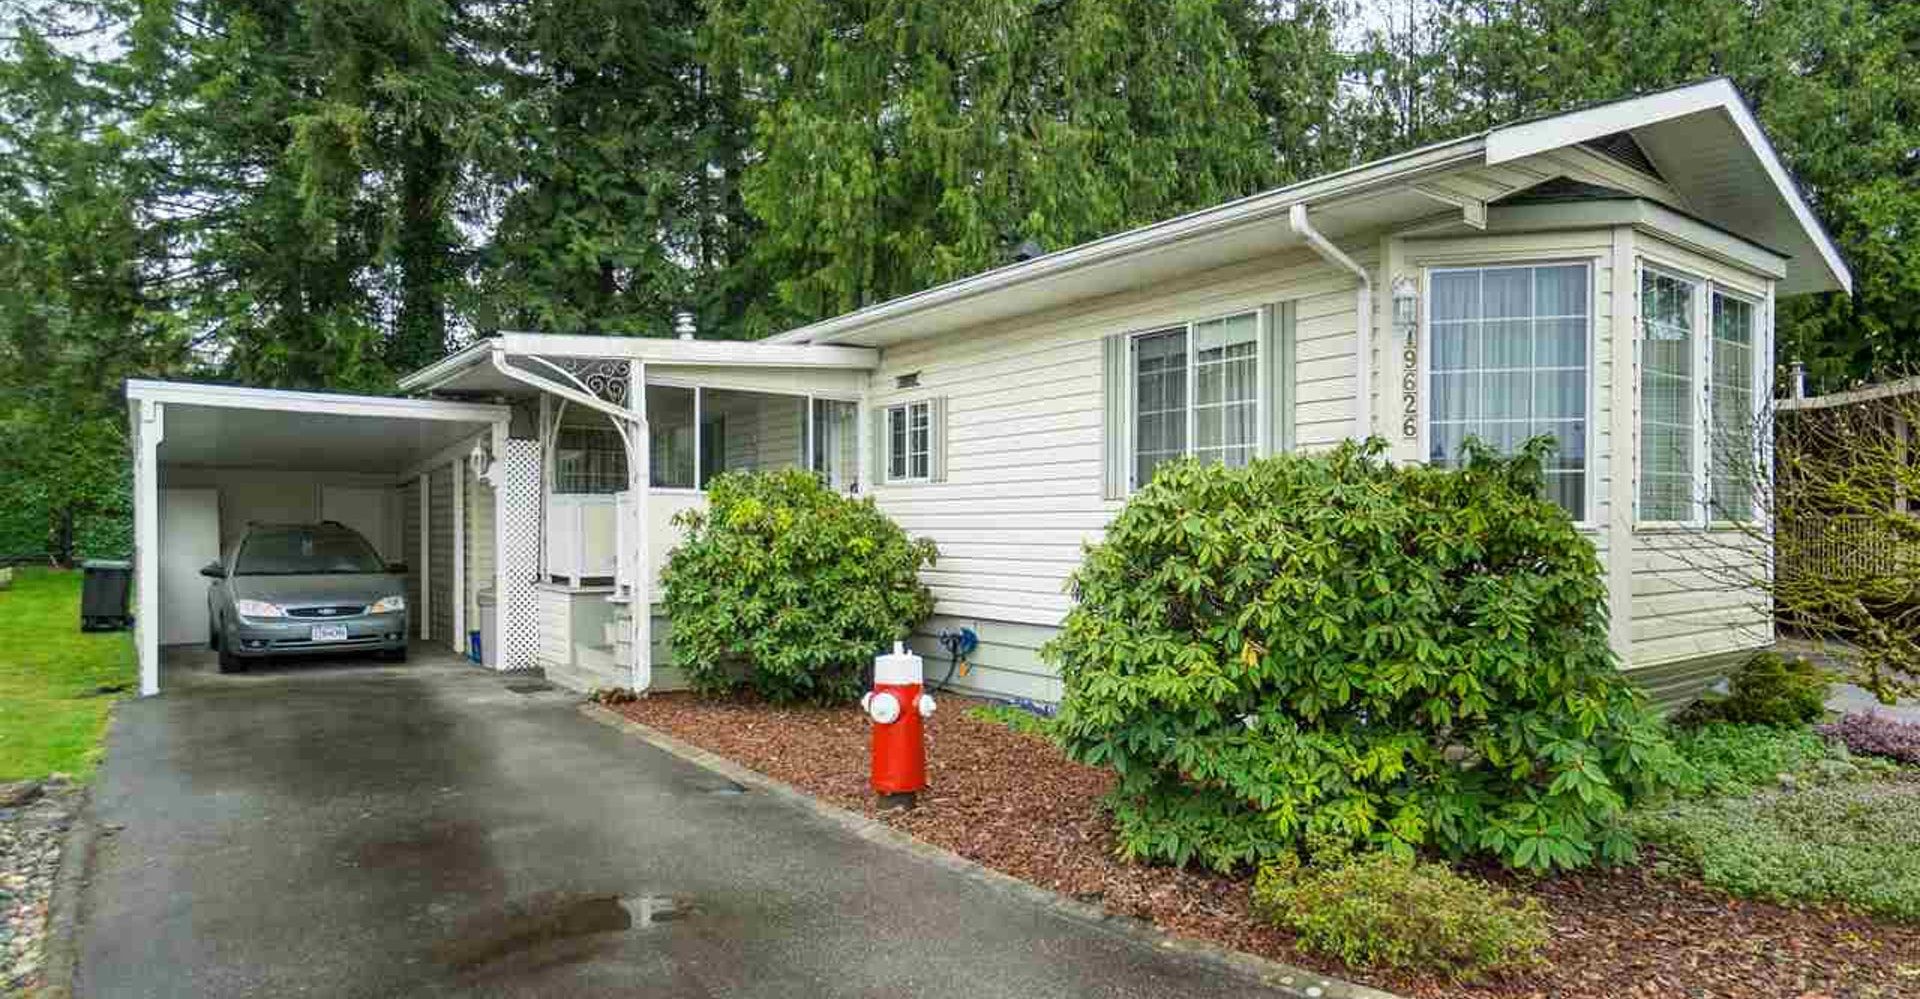 Greg & Colin Thornton HAVE JUST SOLD ANOTHER property at 19626 Pinyon LANE in Pitt Meadows 